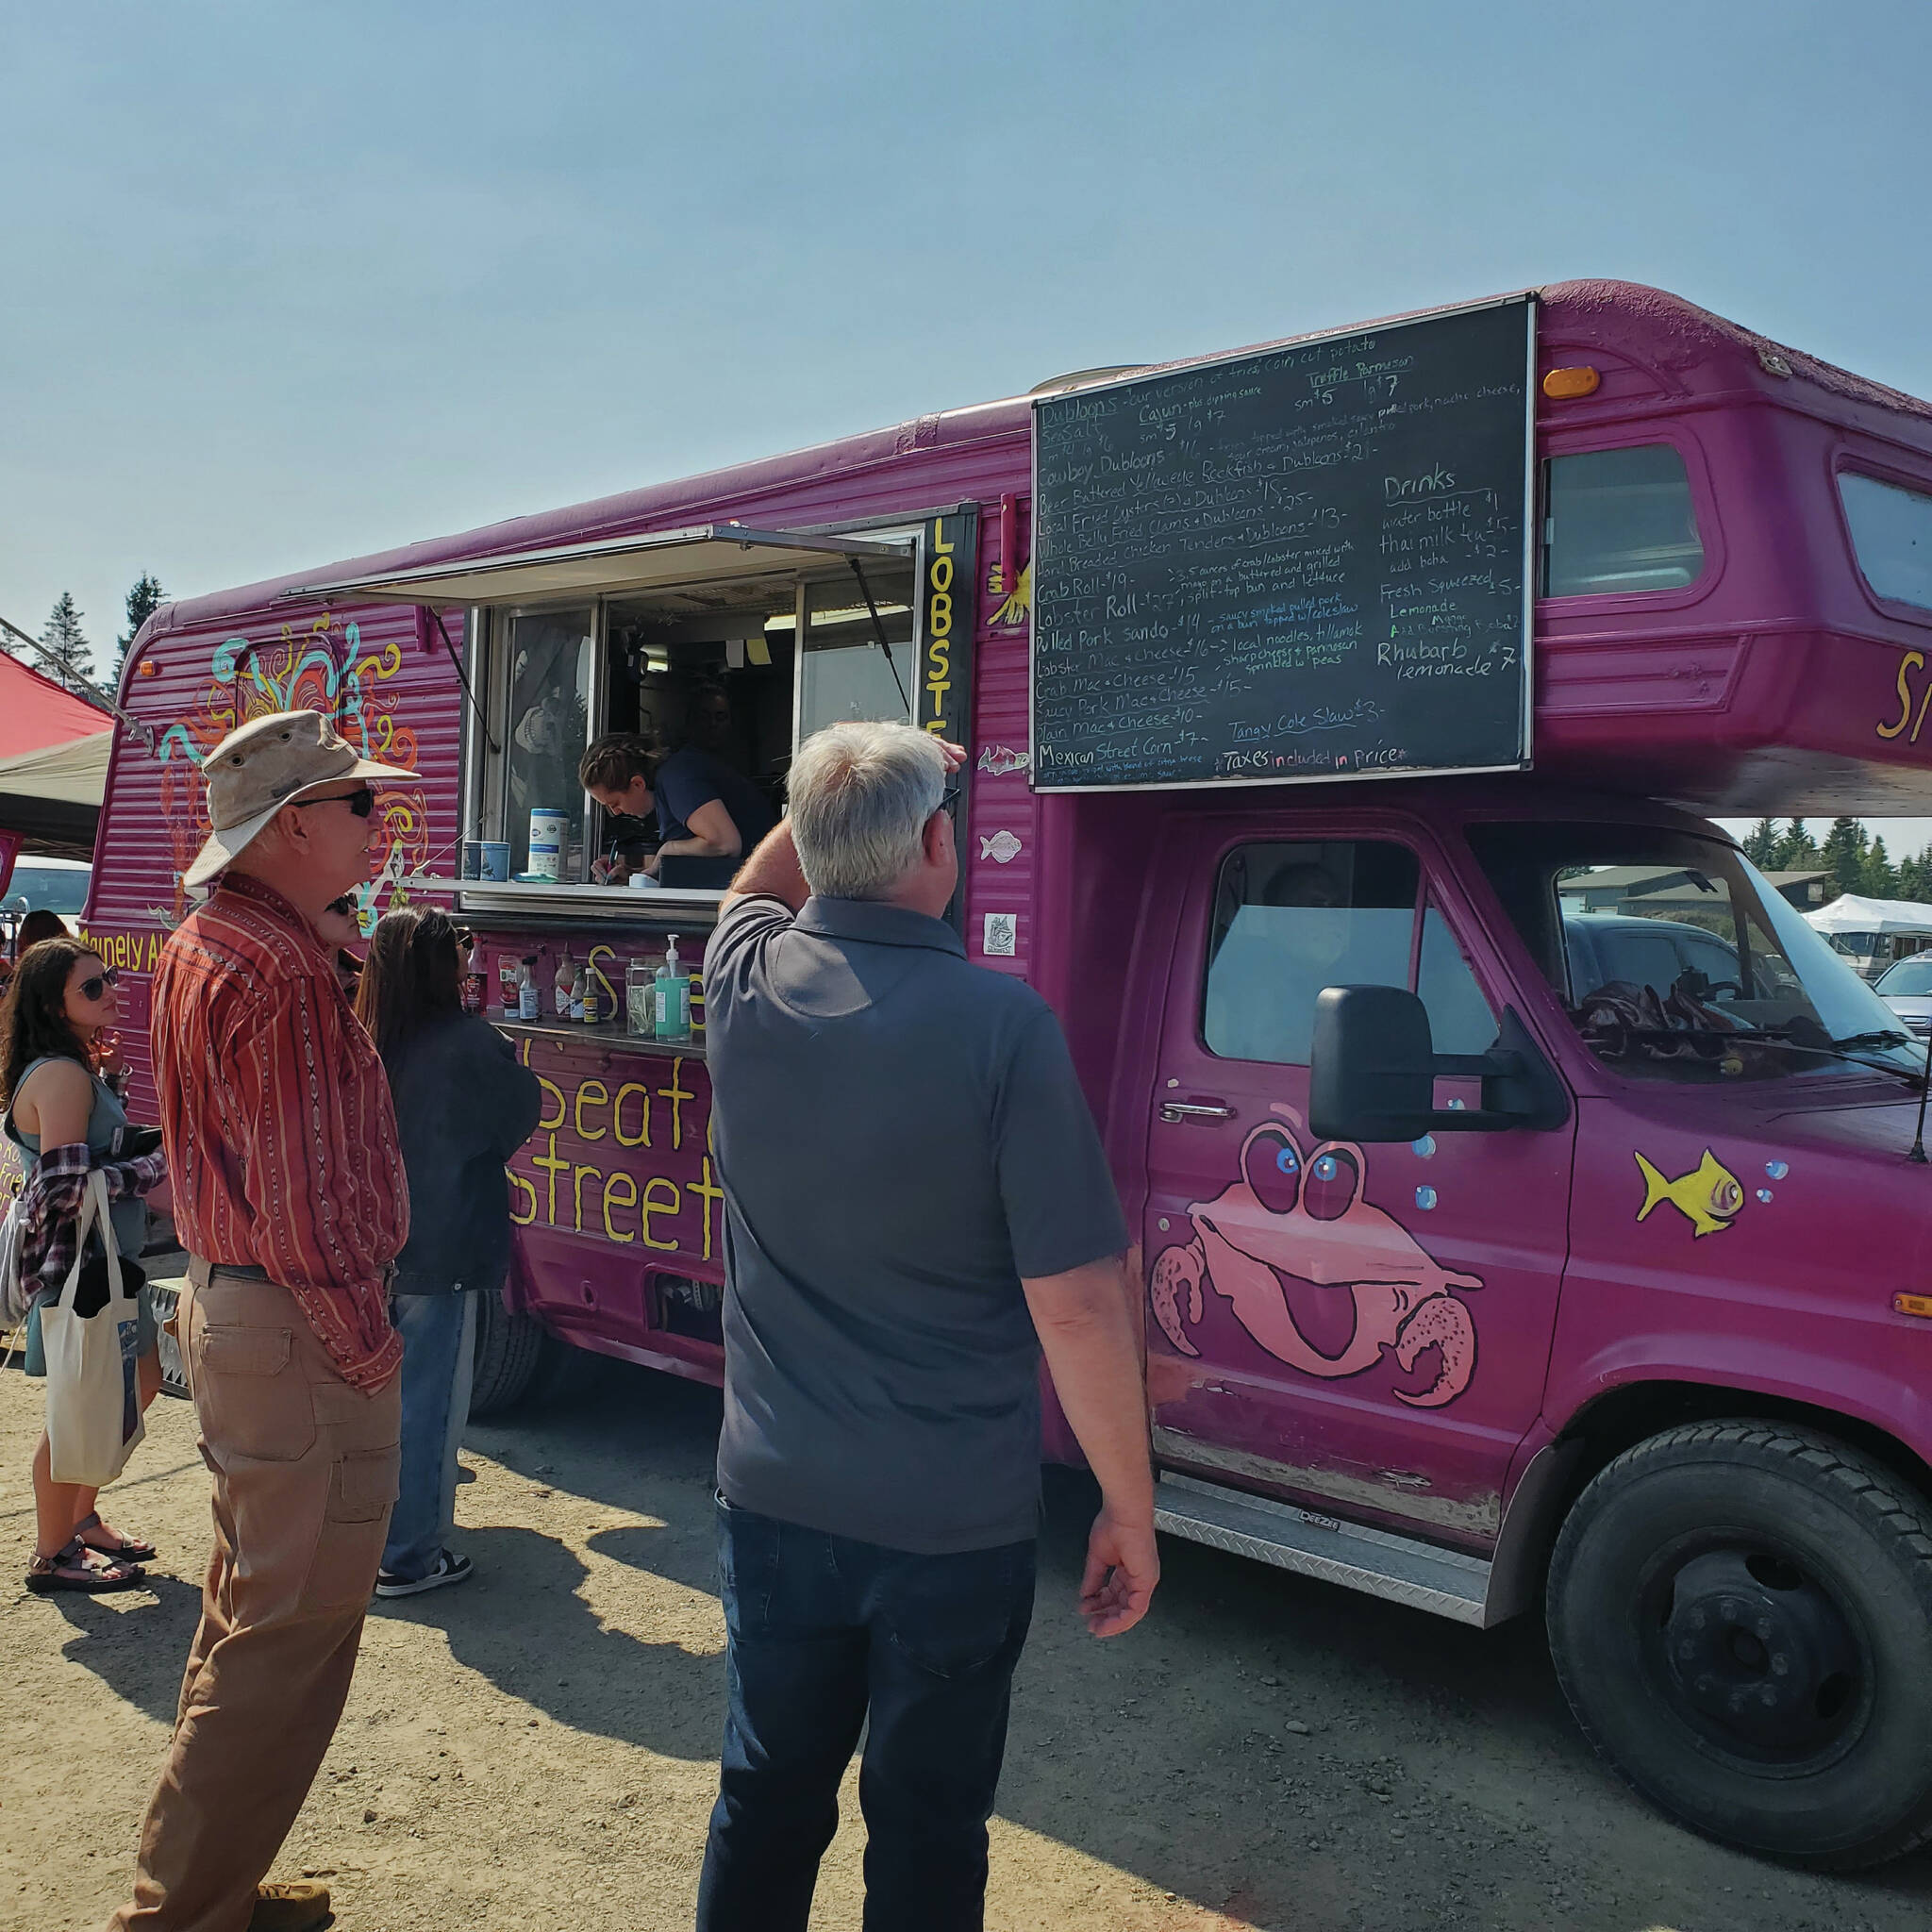 A food vendor serves customers during the 2022 Concert on the Lawn held at the Down East Saloon. (Photo provided by Josh Krohn, KBBI)